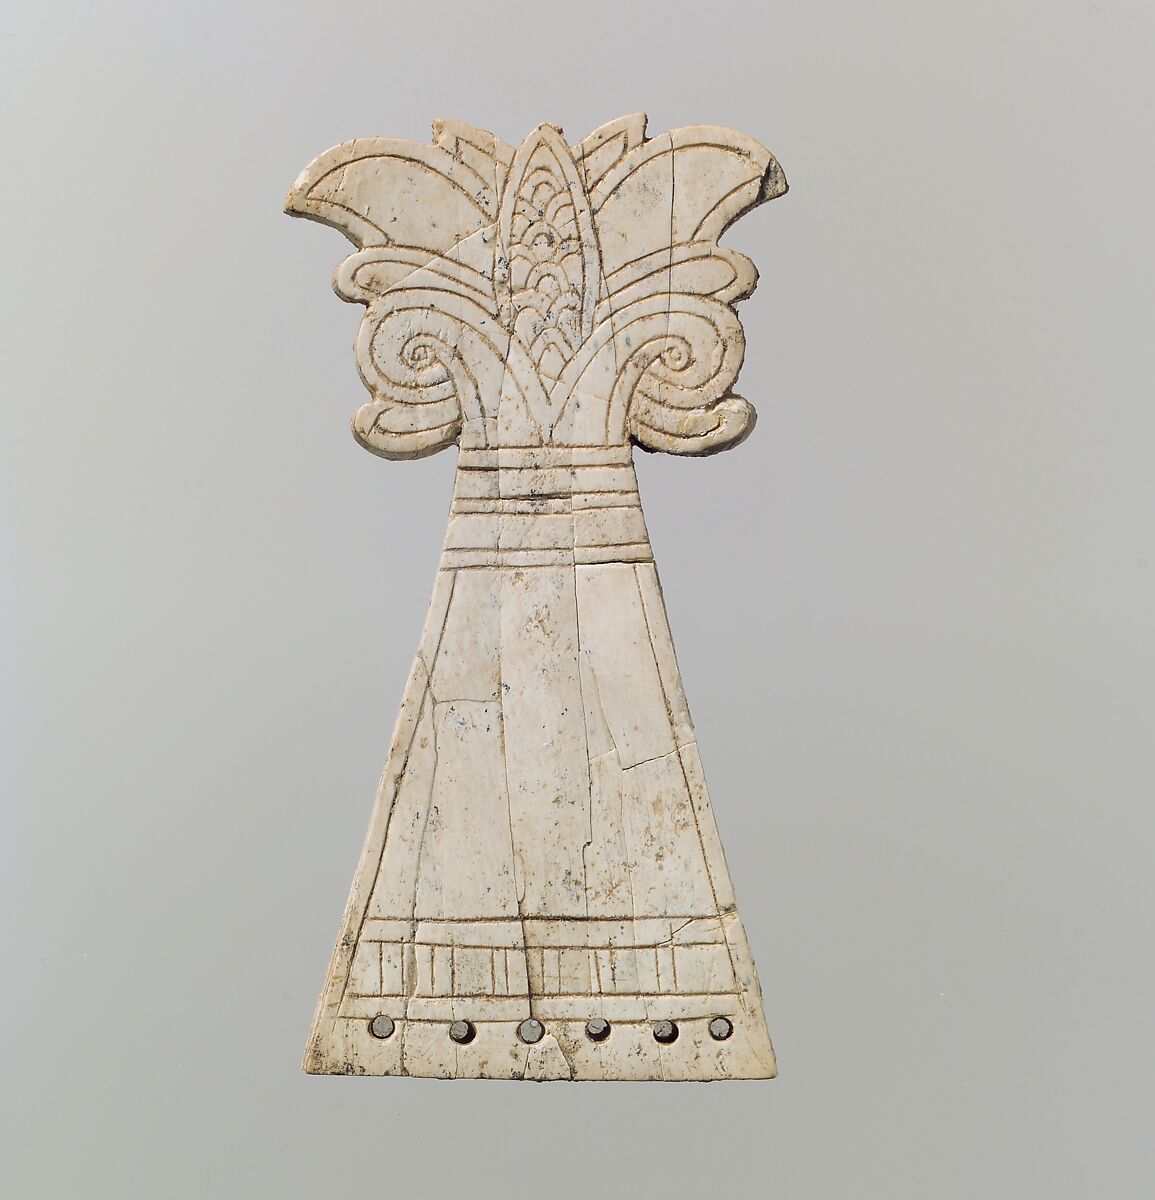 Incised horse frontlet carved into the shape of a flowering, volute palmette tree, Ivory, Assyrian 